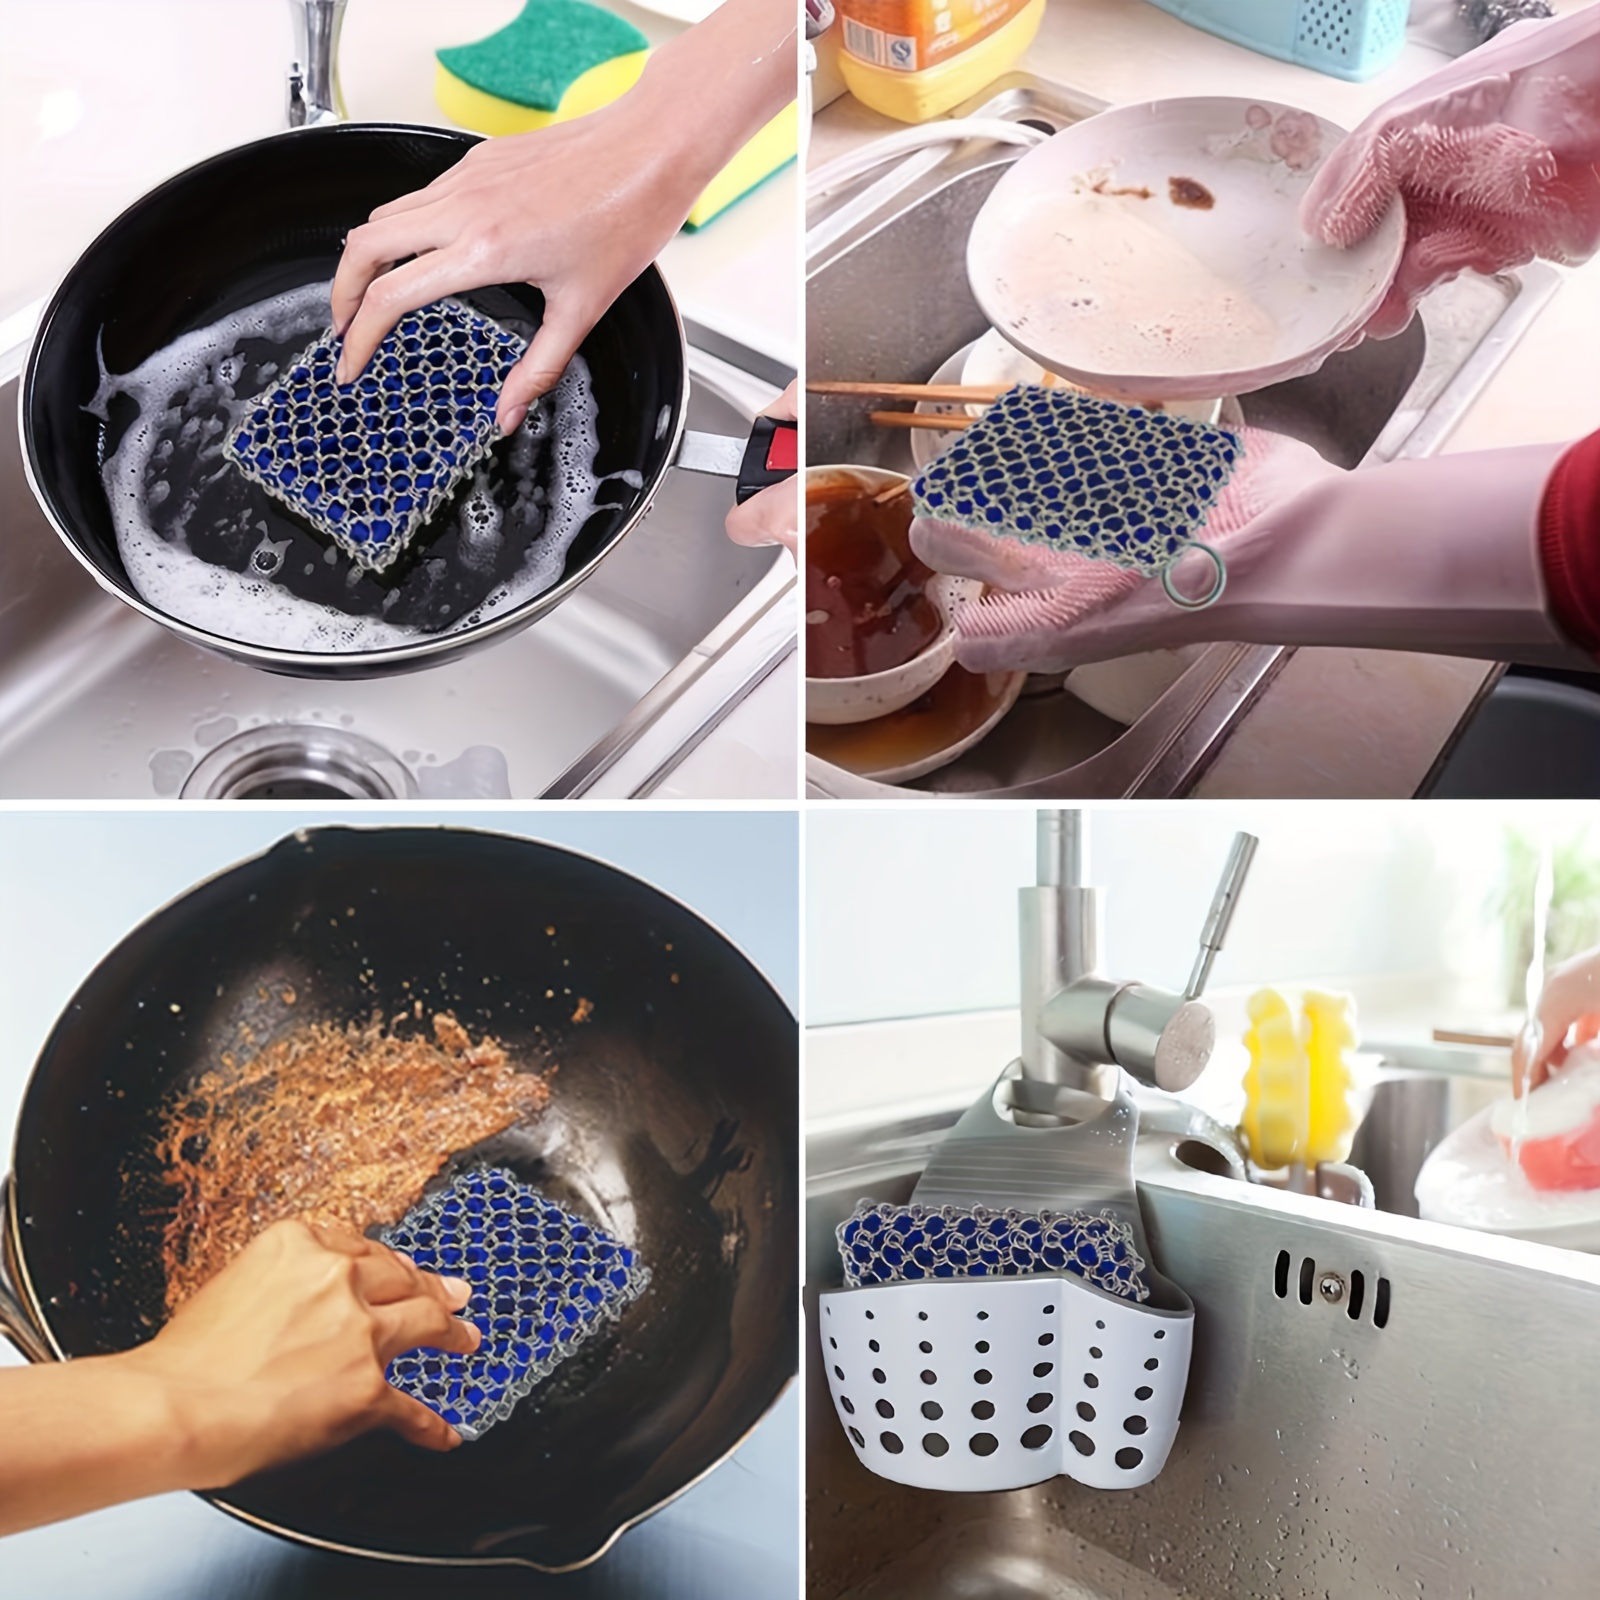  Cast Iron Skillet Cleaner, 316 Stainless Steel Chainmail  Cleaning Scrubber with Silicone Insert for Cleaning Castiron  Pan,Griddle,Baking Pan : Health & Household